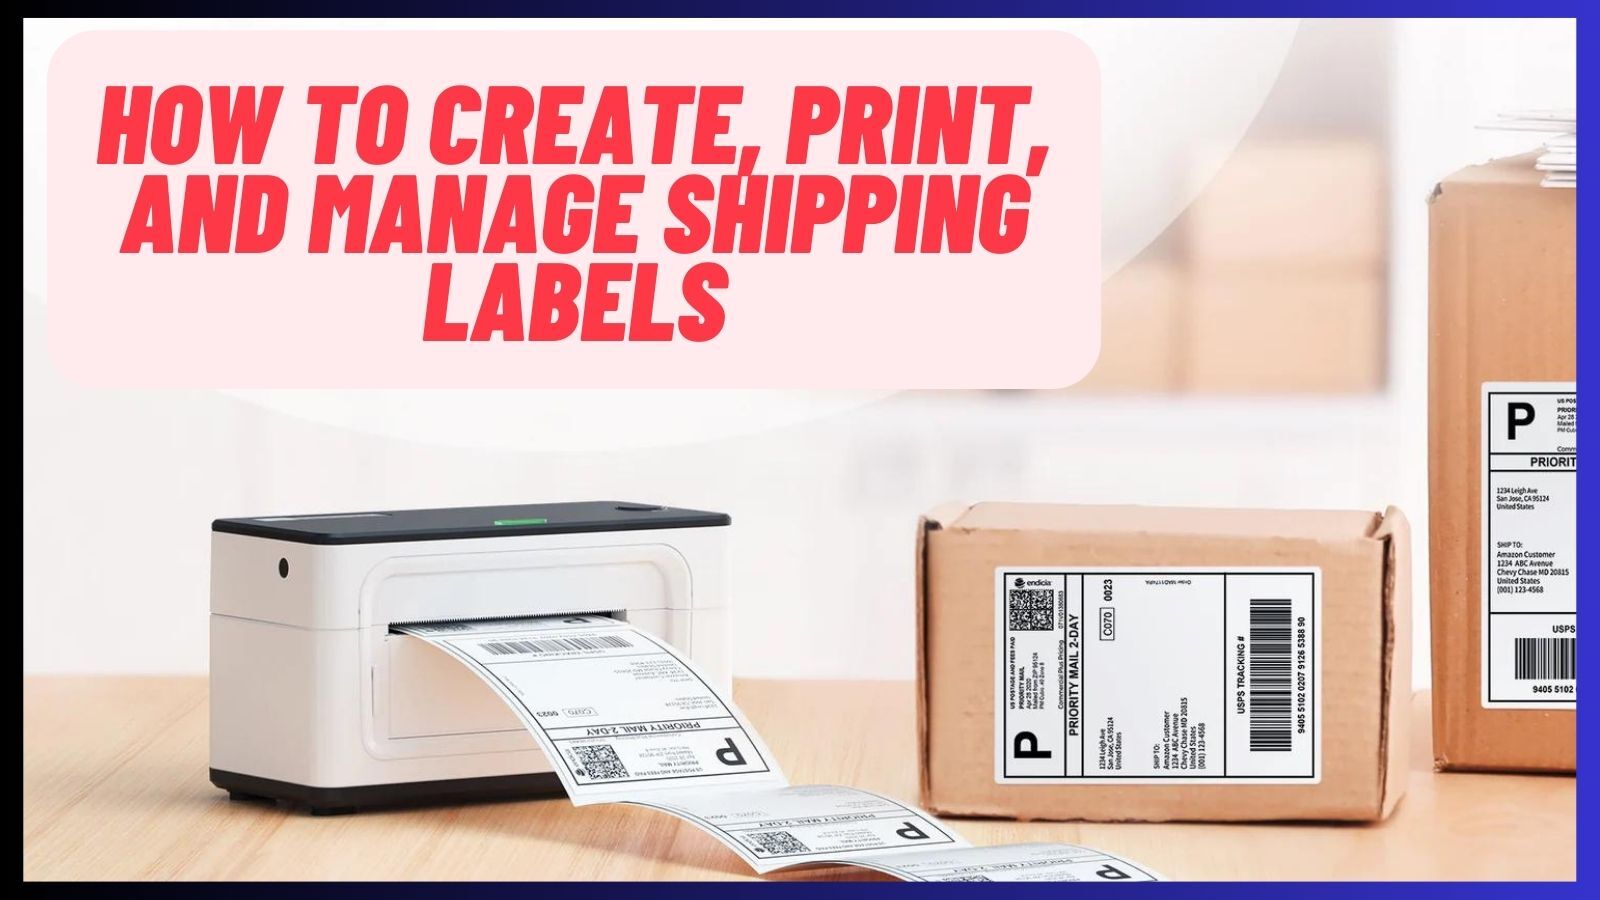 How to Reprint Shipping Labels?